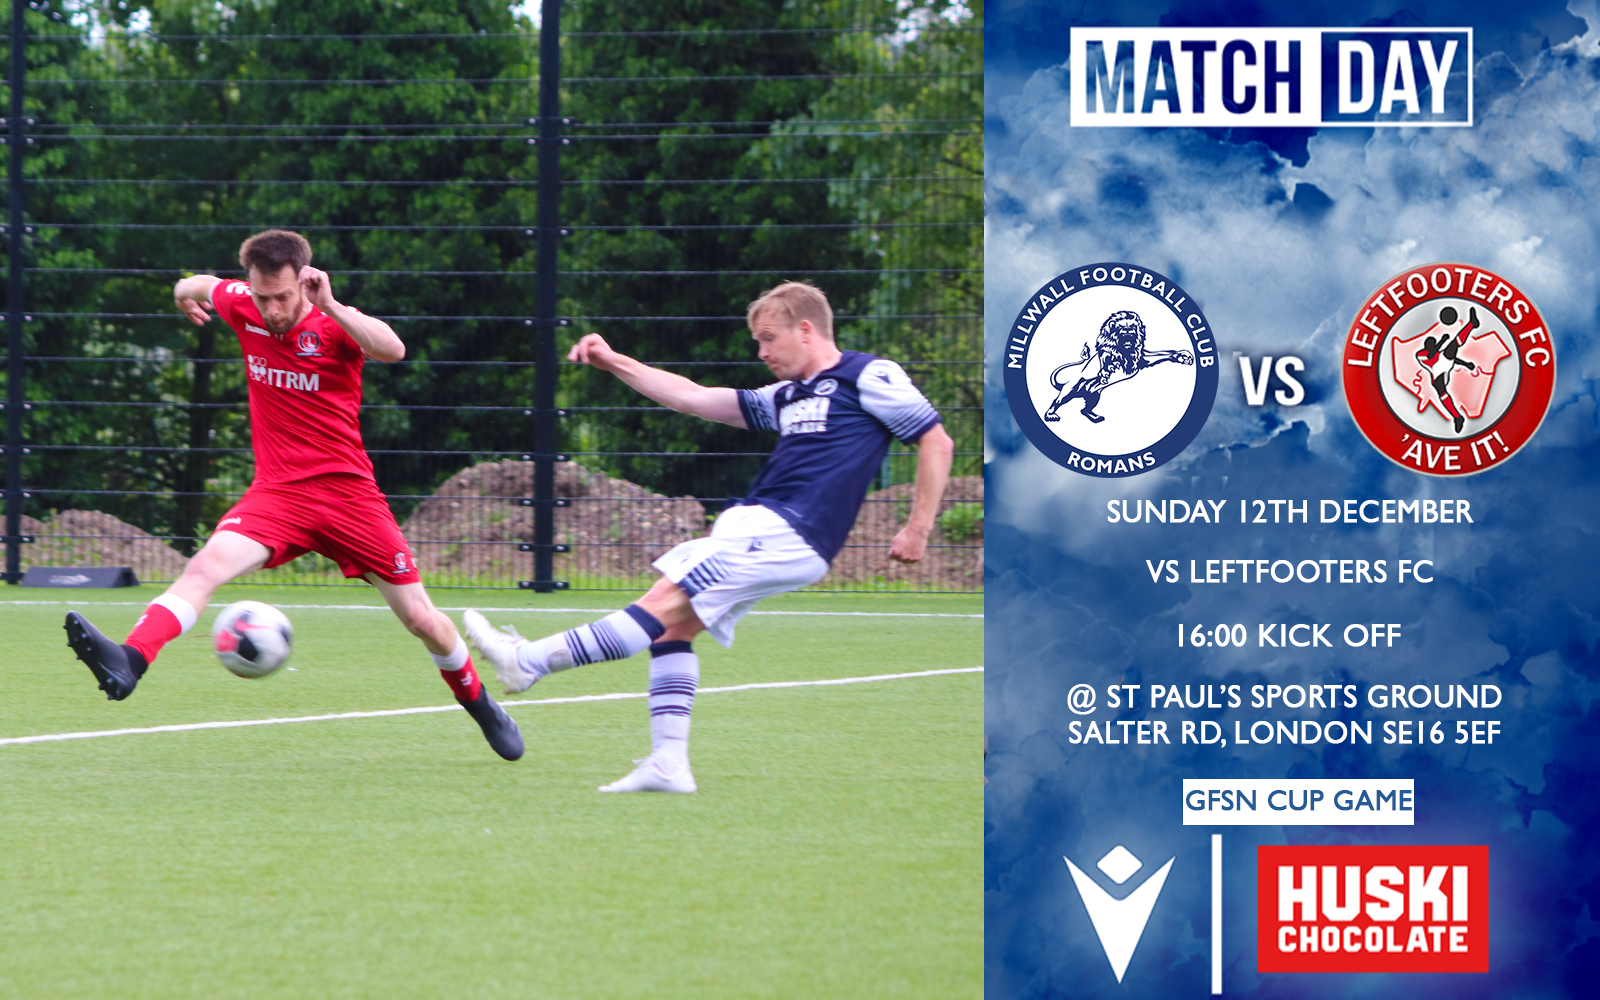 Millwall Community Trust - Millwall Romans vs Leftfooters FC GFSN Cup Game